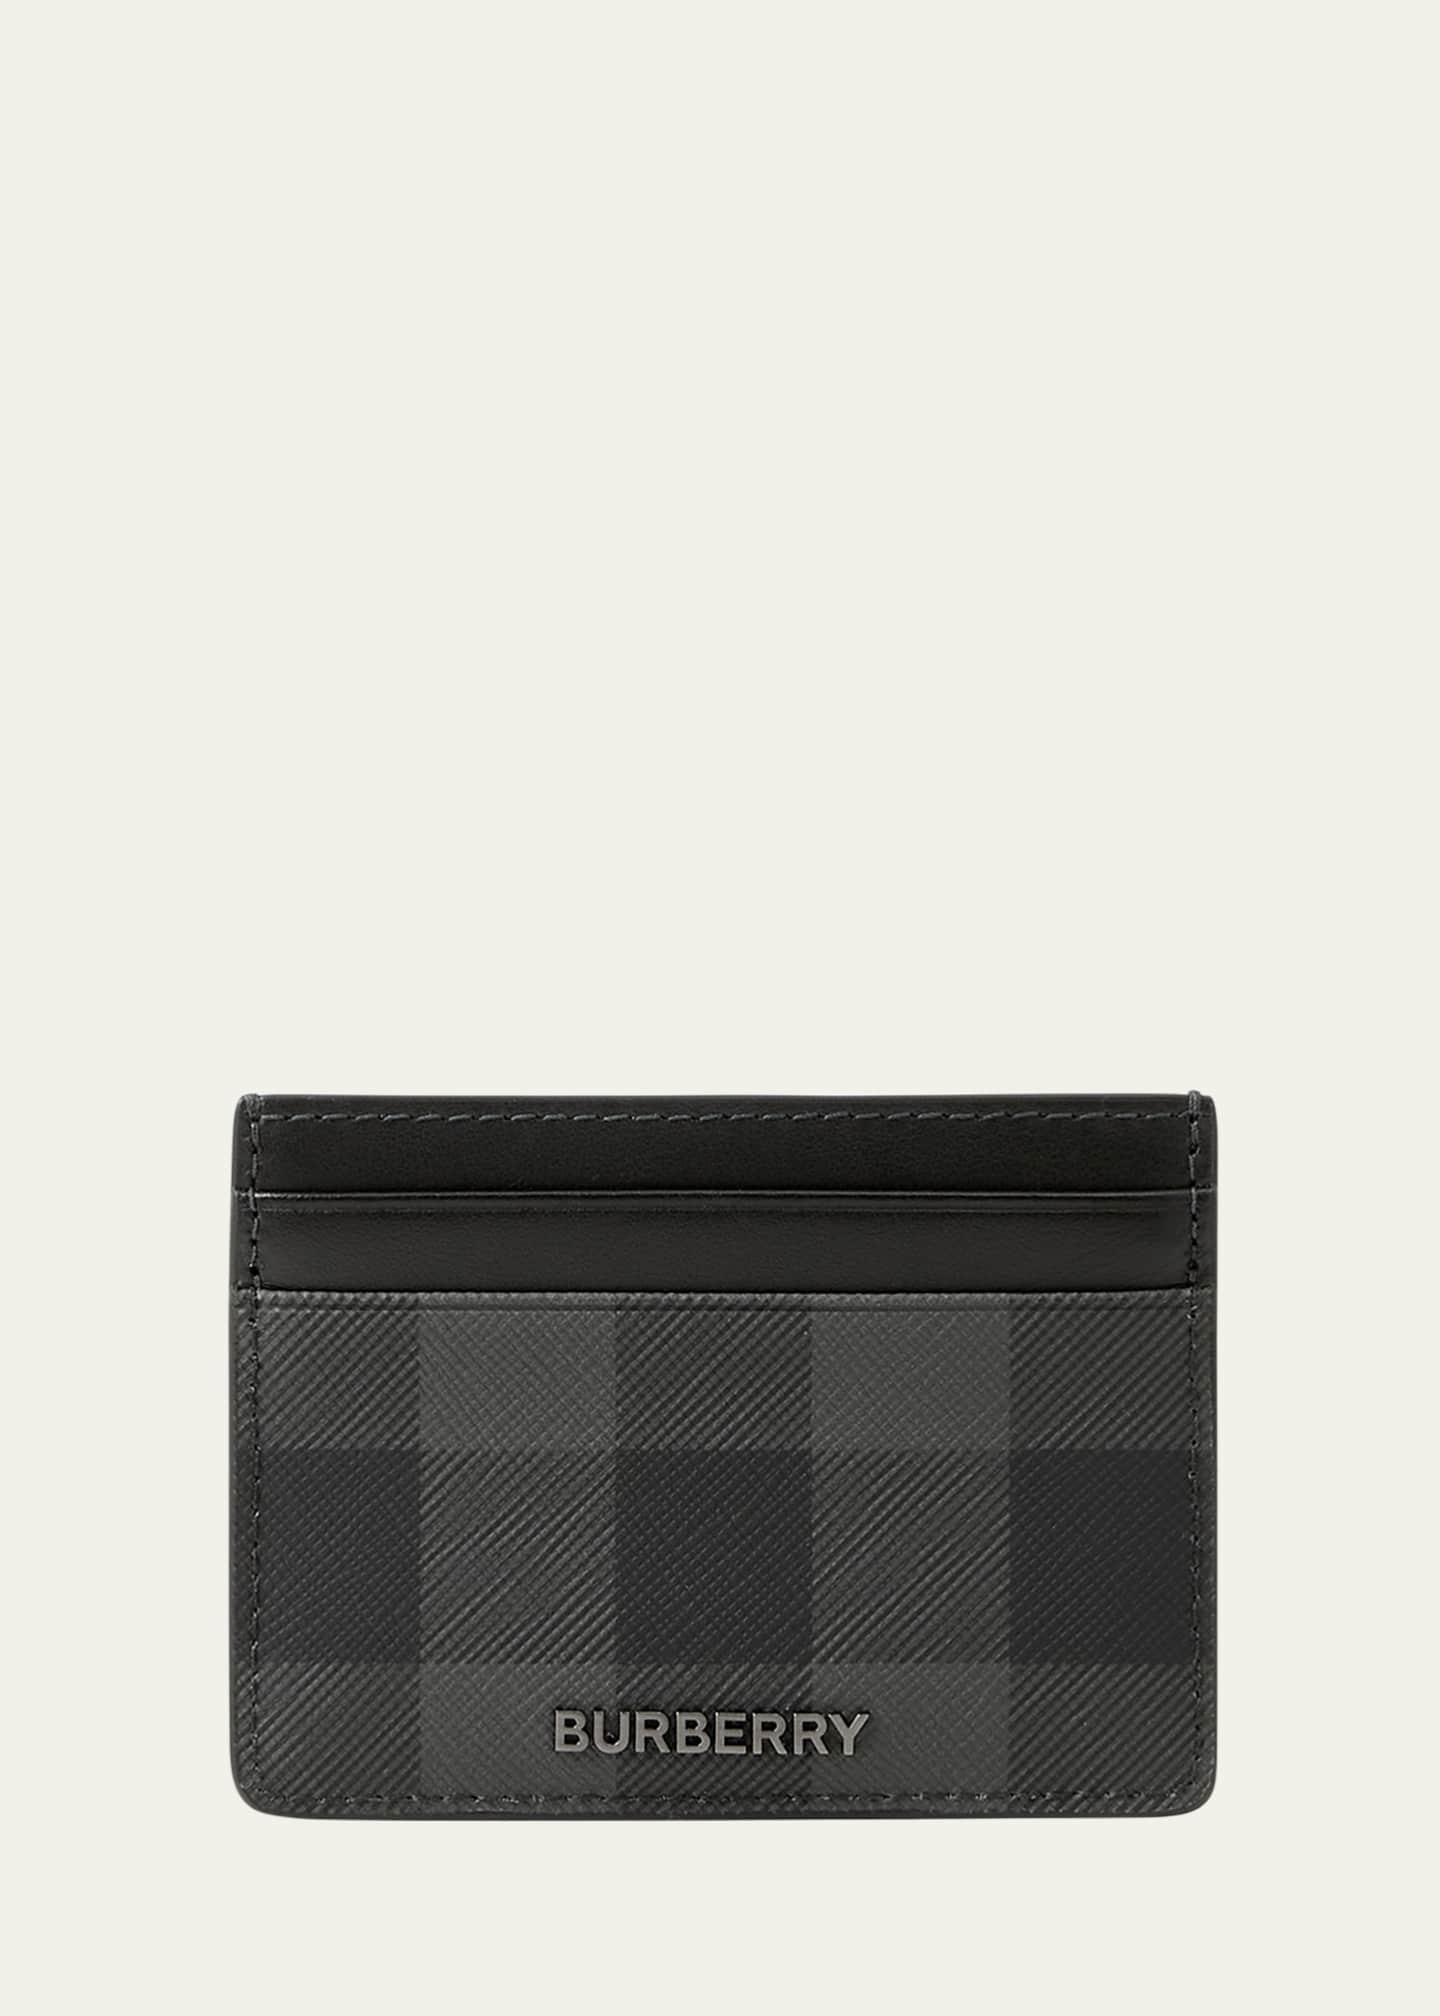 Burberry House Check Chase Black Grainy Leather Money Clip Card Case Wallet  